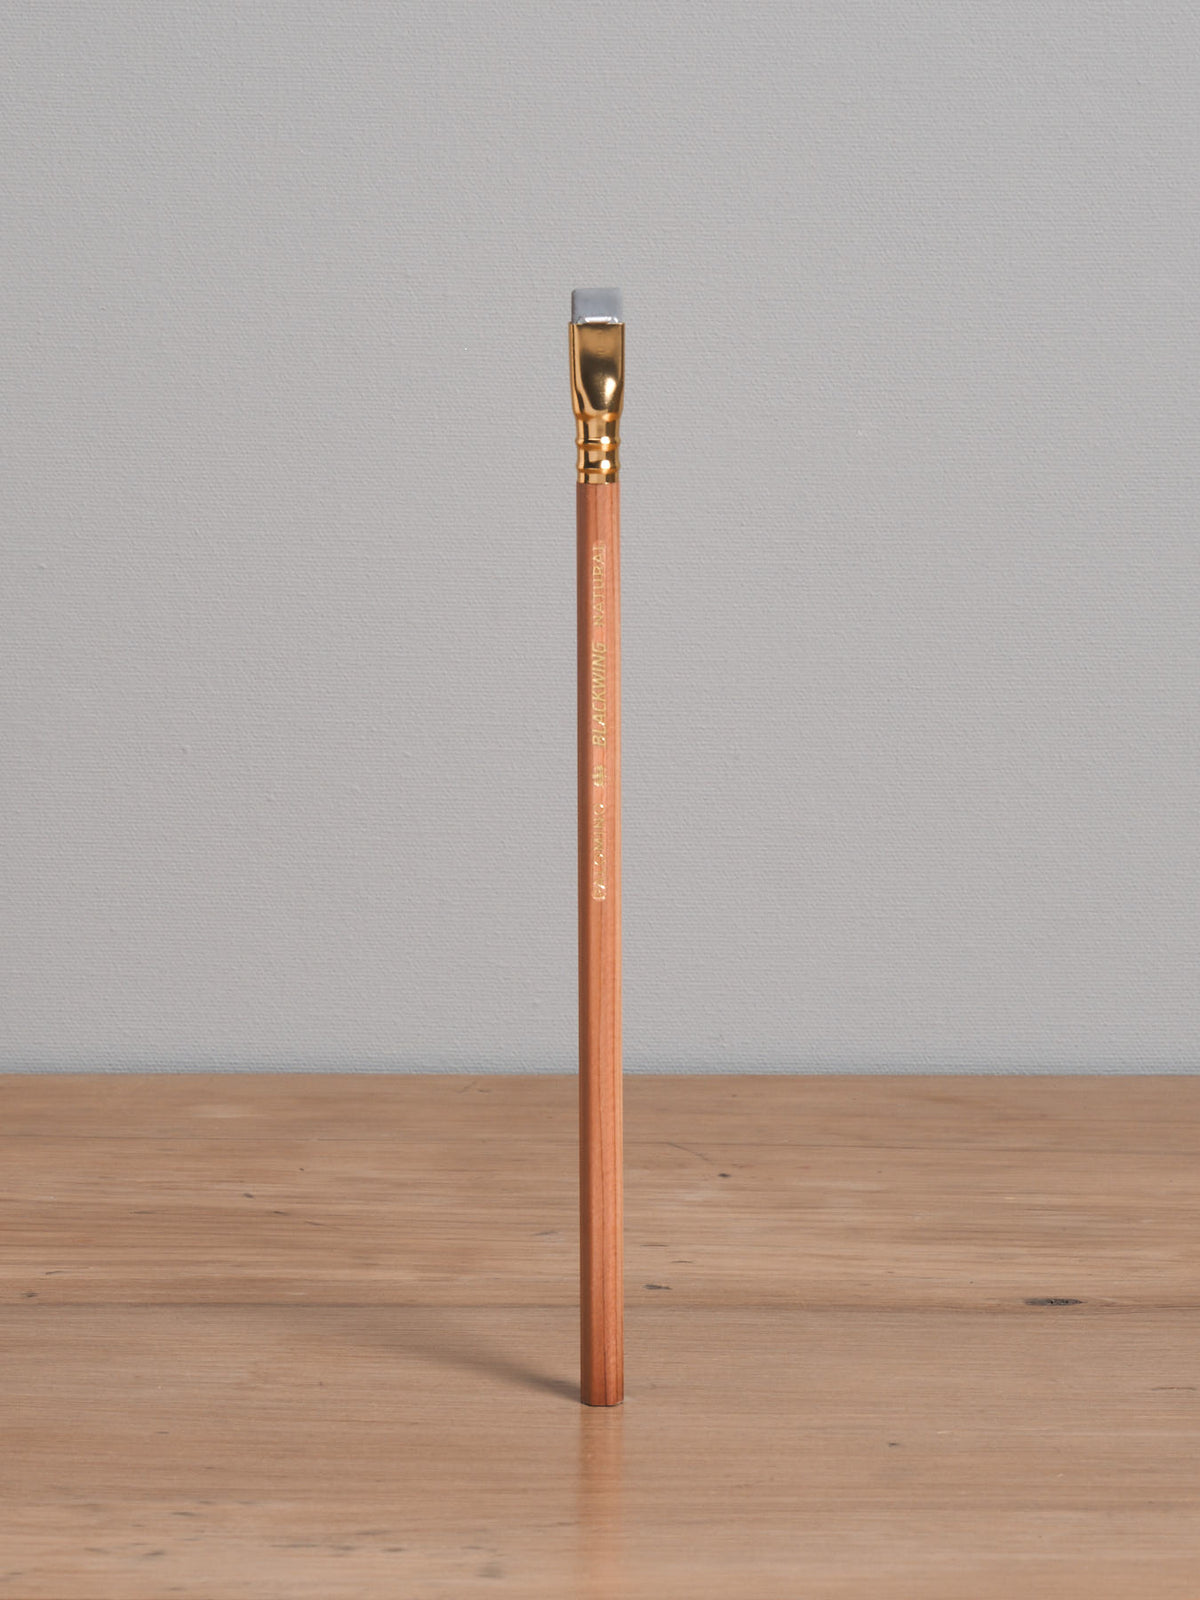 A Blackwing Natural Pencil, made by Palomino Blackwing, sitting on top of a wooden table.